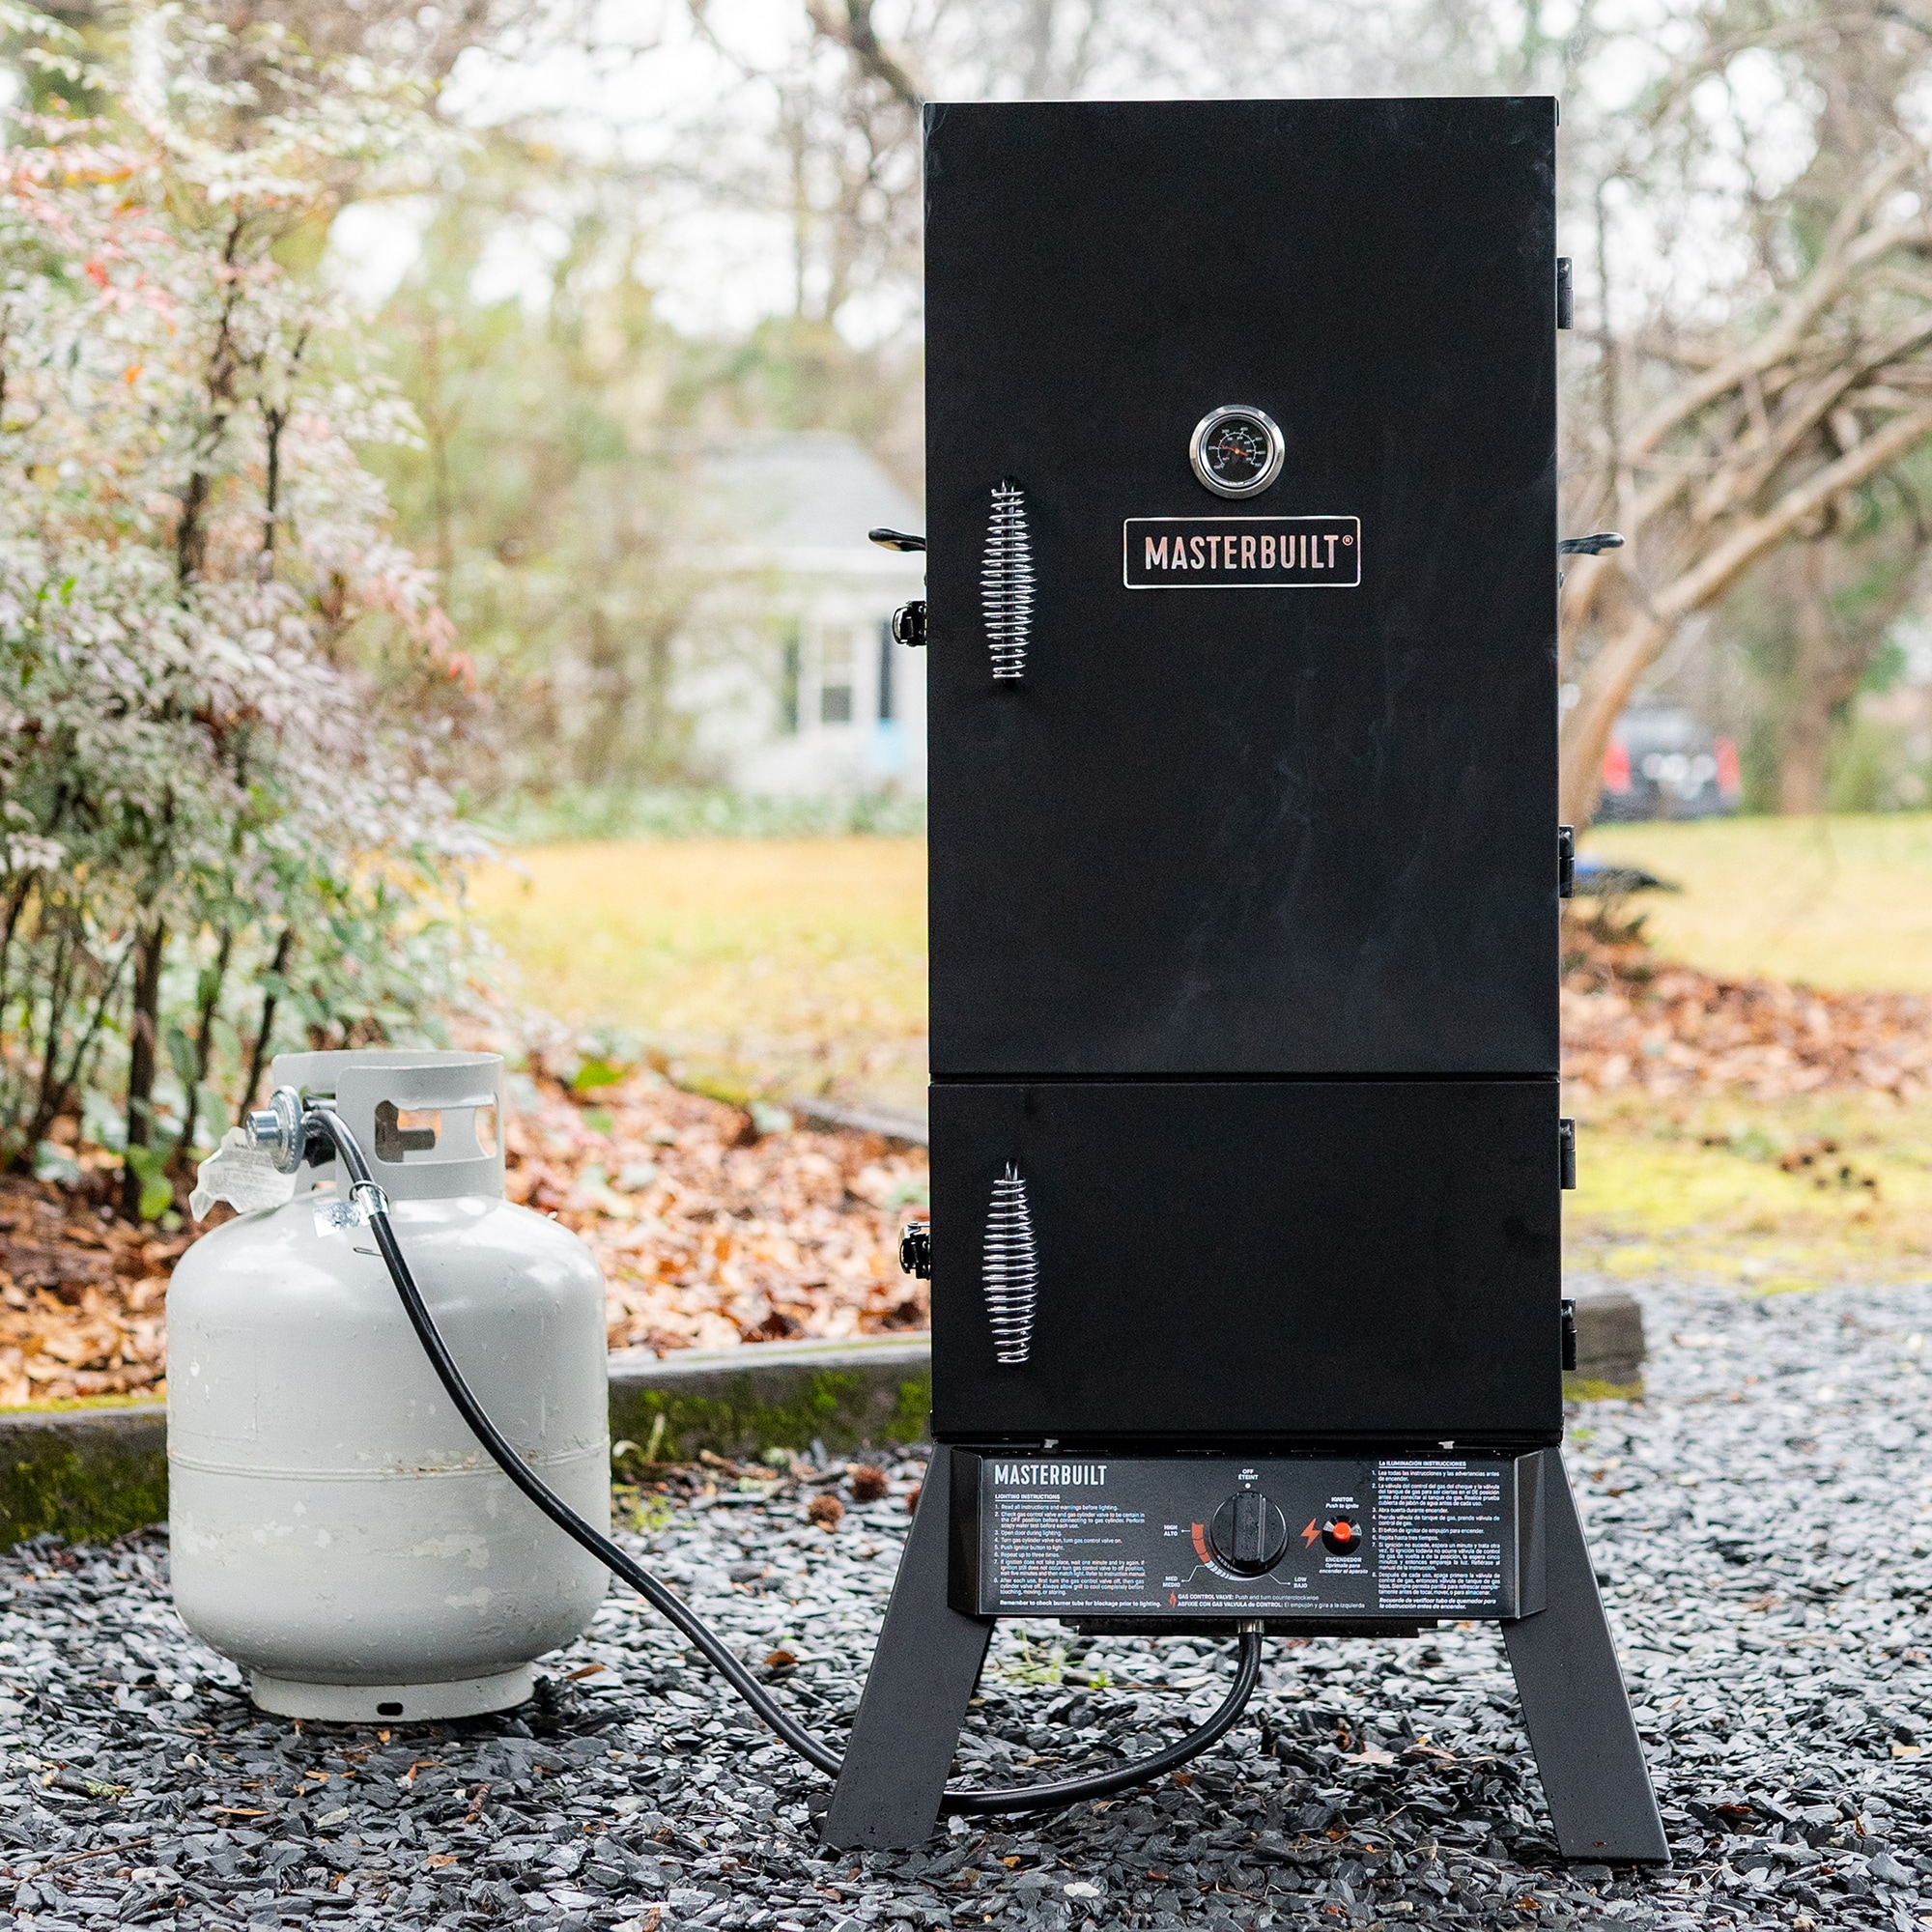 Sportsman Elite 40 Vertical Gas Smoker: Features and Benefits